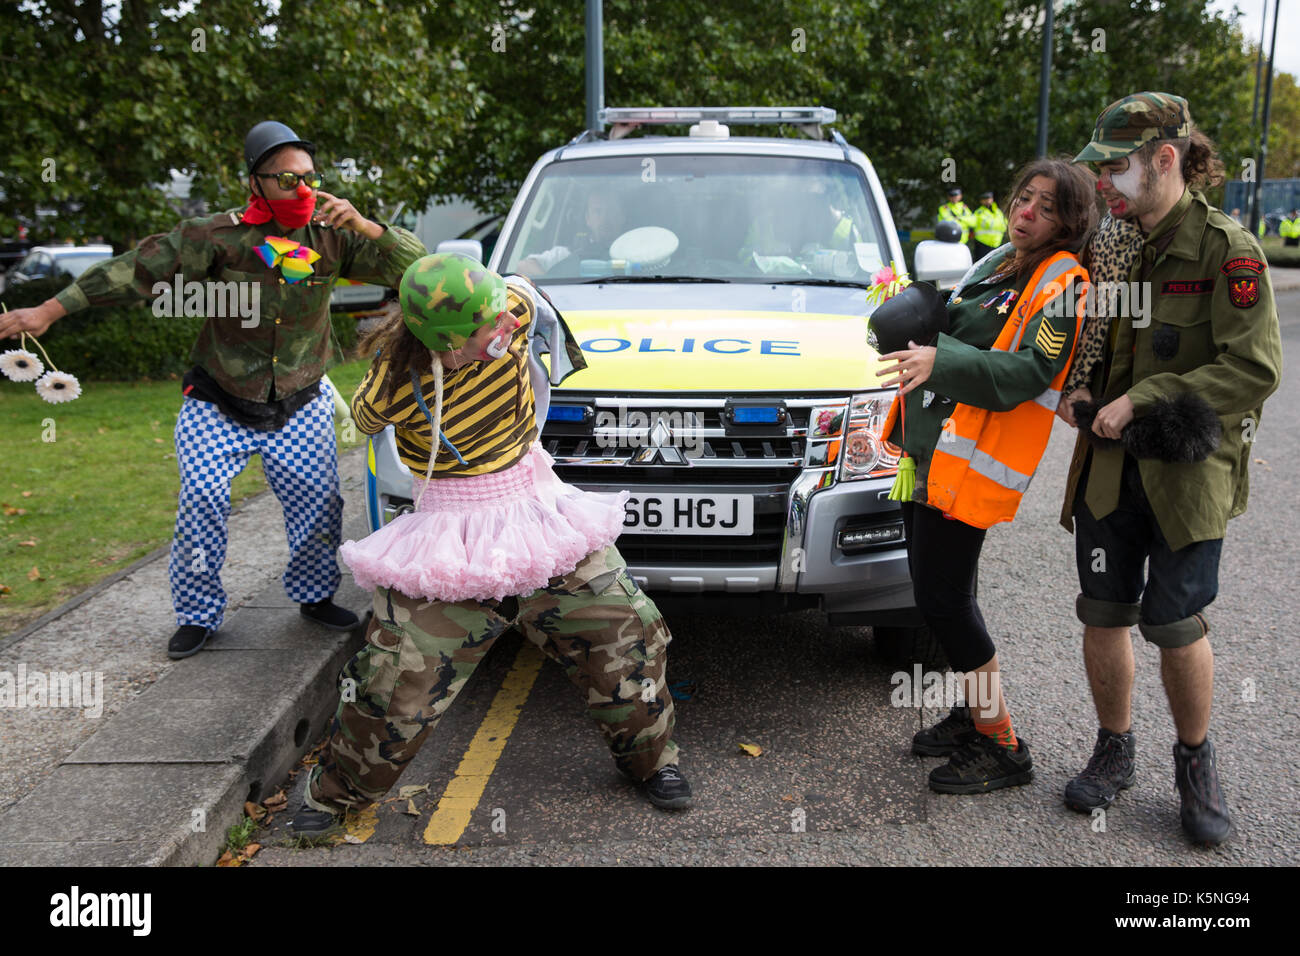 London, UK. 9th September, 2017. The Clandestine Insurgent Rebel Clown Army performs in front of the police and activists from many different campaign and faith groups protesting outside the ExCel Centre against the arms trade and the arms fair to be held at the venue next week. DSEI is the world's largest arms fair and military delegations invited by the British government include states named by the Foreign Office as a 'human rights priority', namely Bahrain, Colombia, Egypt, Pakistan and Saudi Arabia. Credit: Mark Kerrison/Alamy Live News Stock Photo